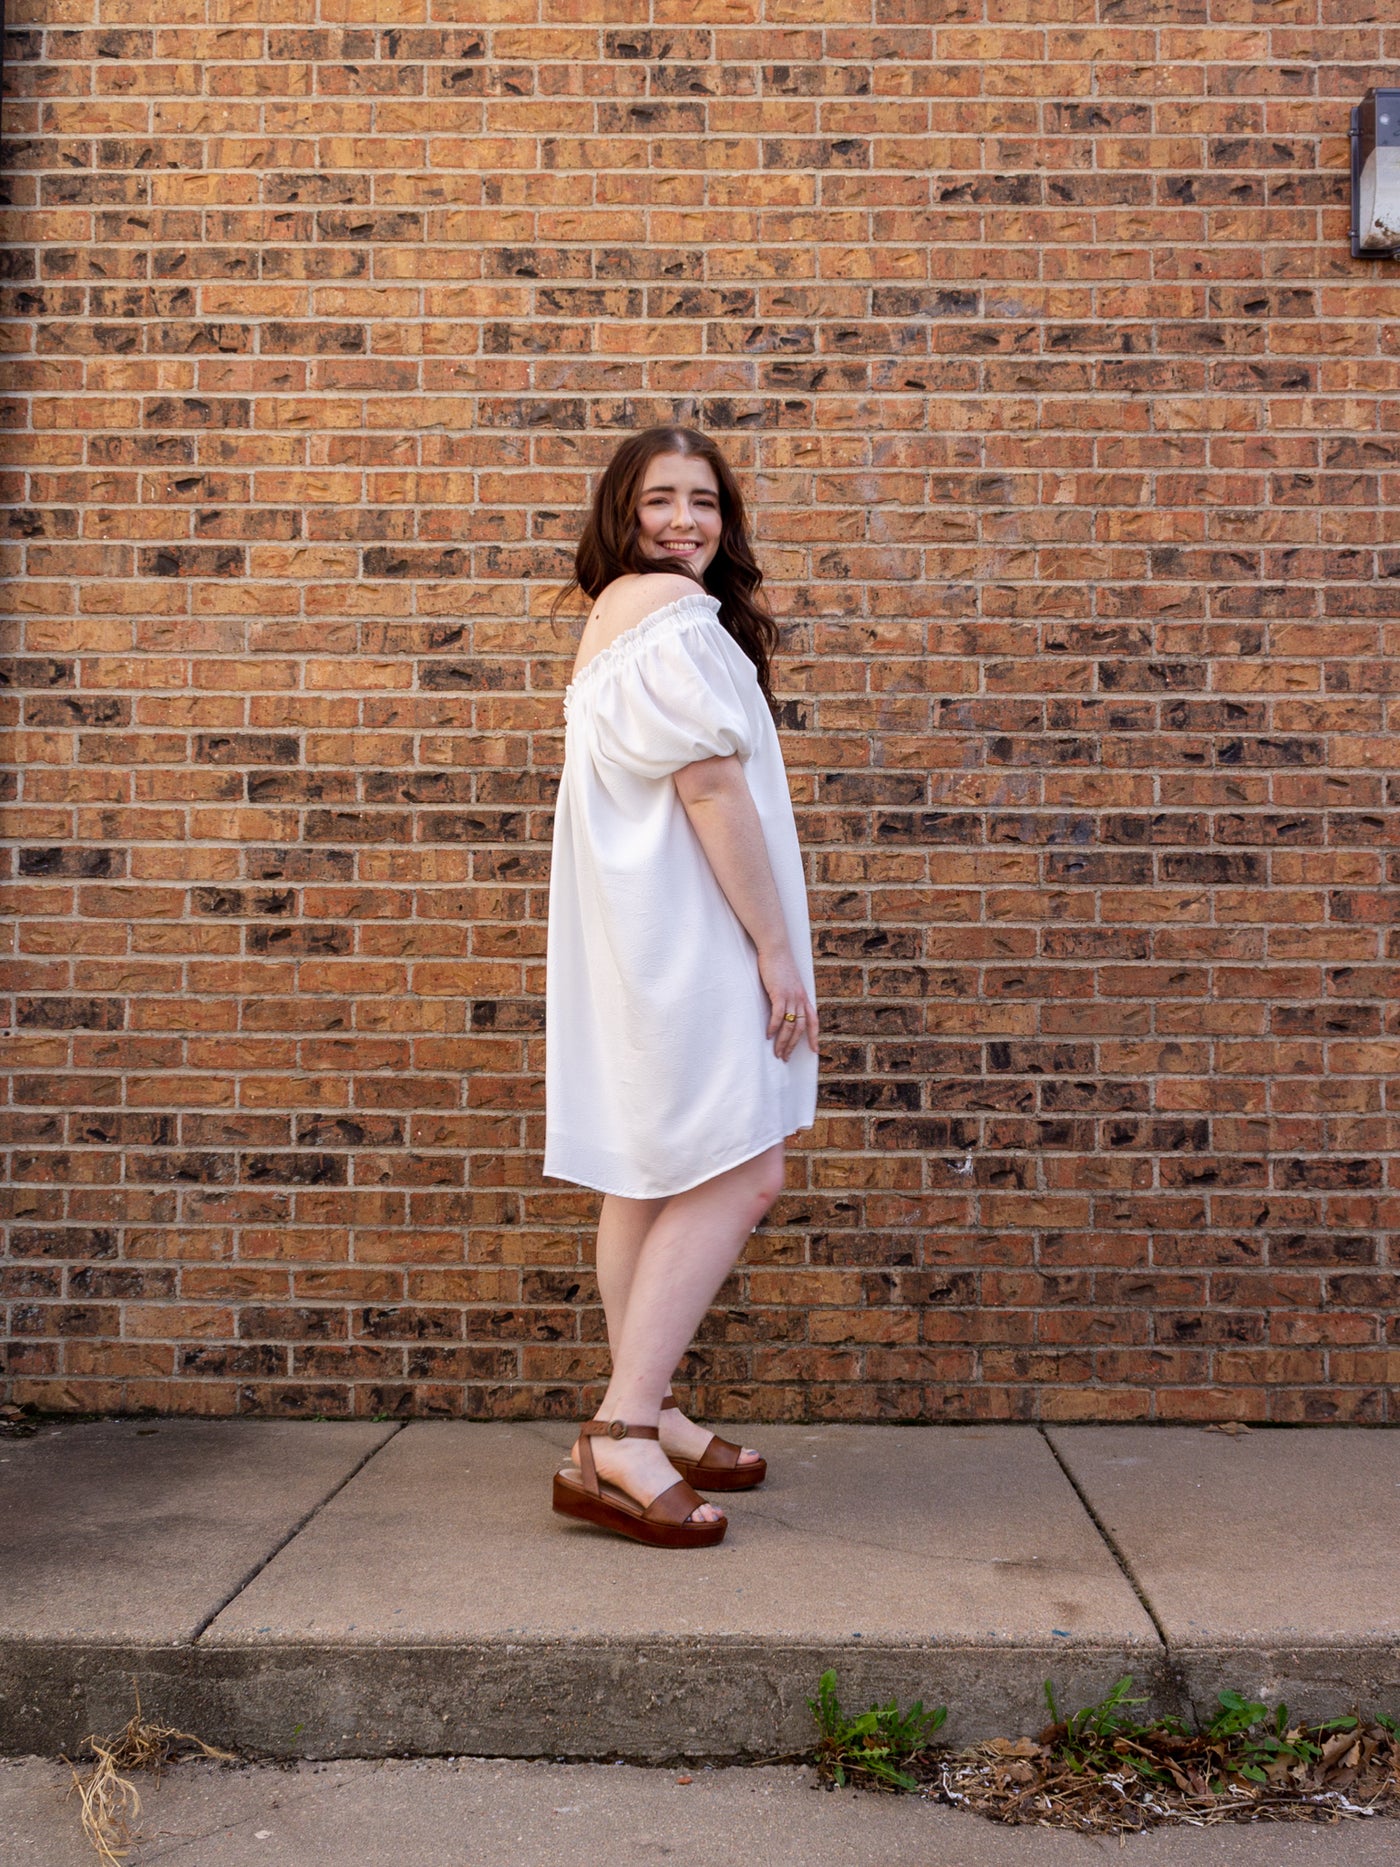 A model wearing a one shoulder, short sleeve white dress that hits right above the knee. The model has it on with a brown platform sandal.